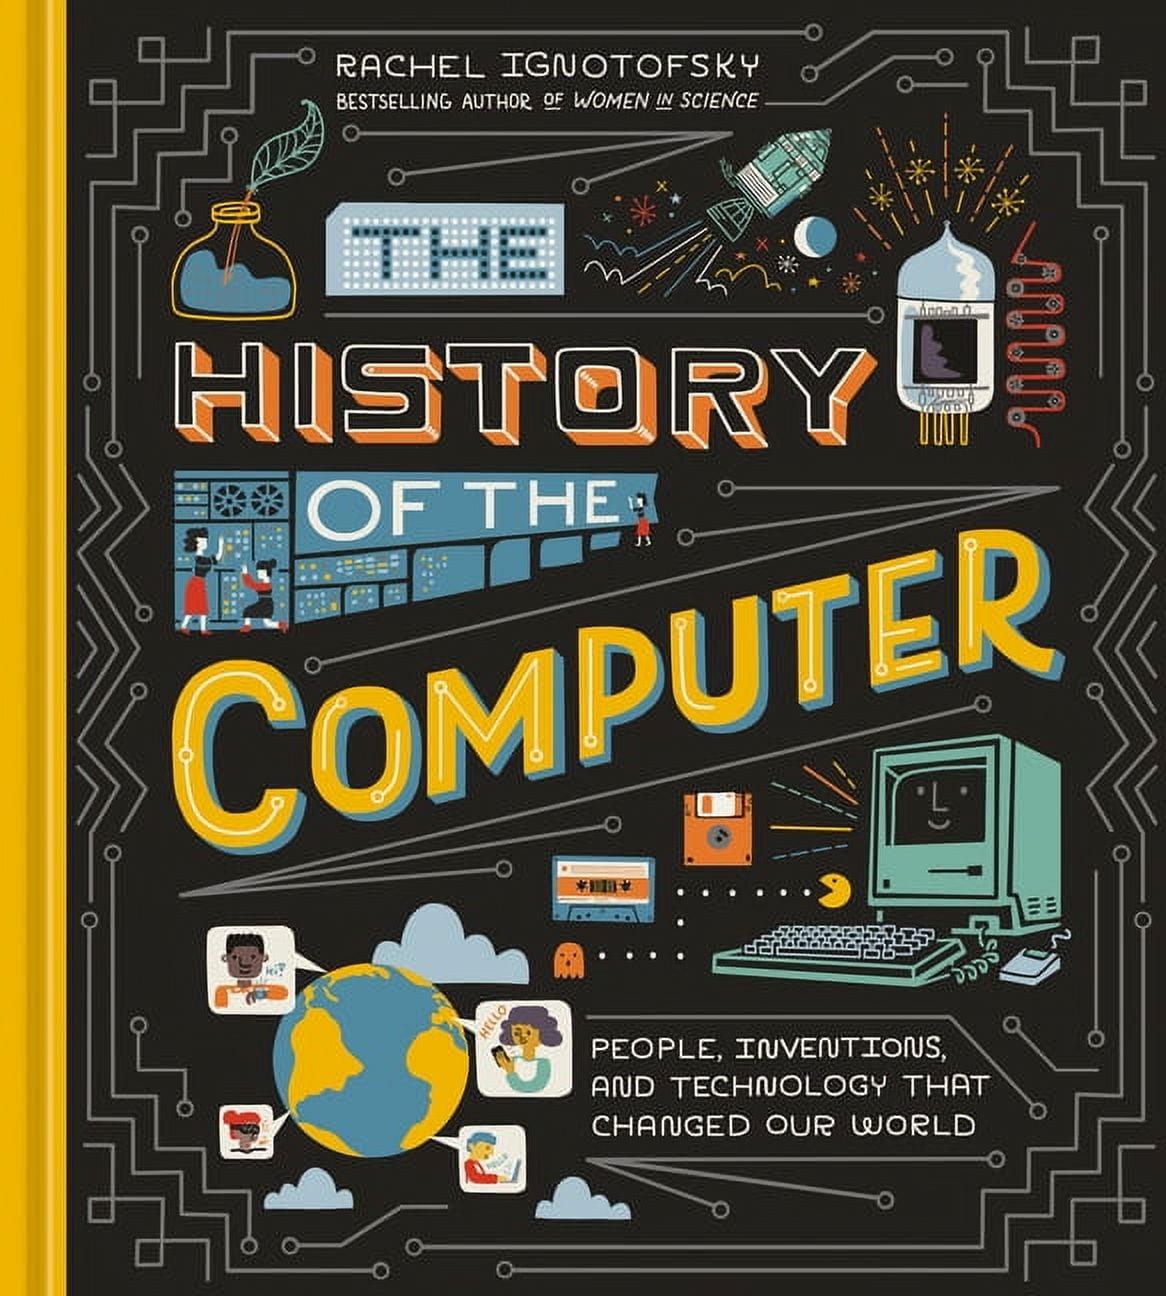 The　and　Technology　World　People,　History　Our　of　the　(Hardcover)　That　Computer:　Inventions,　Changed